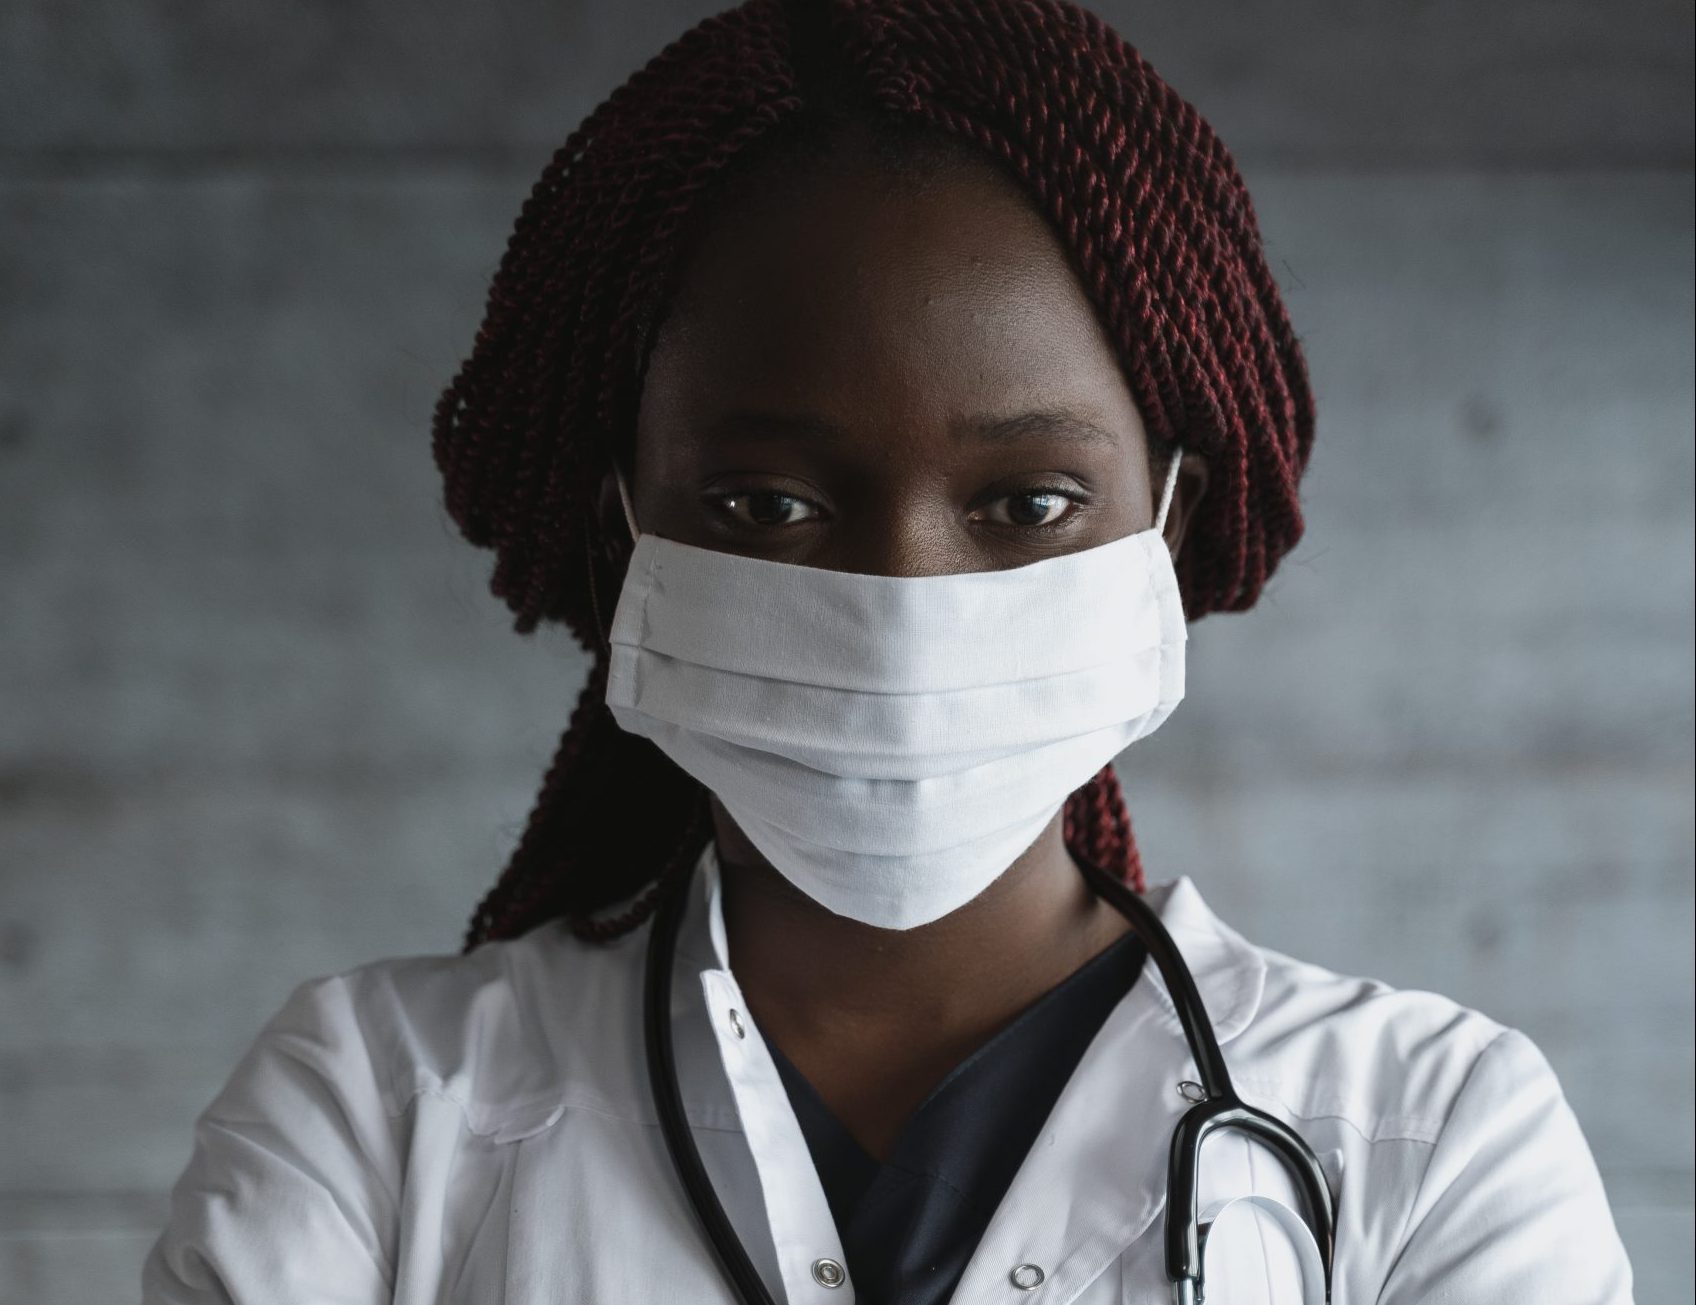 A woman in white lab coat and face mask